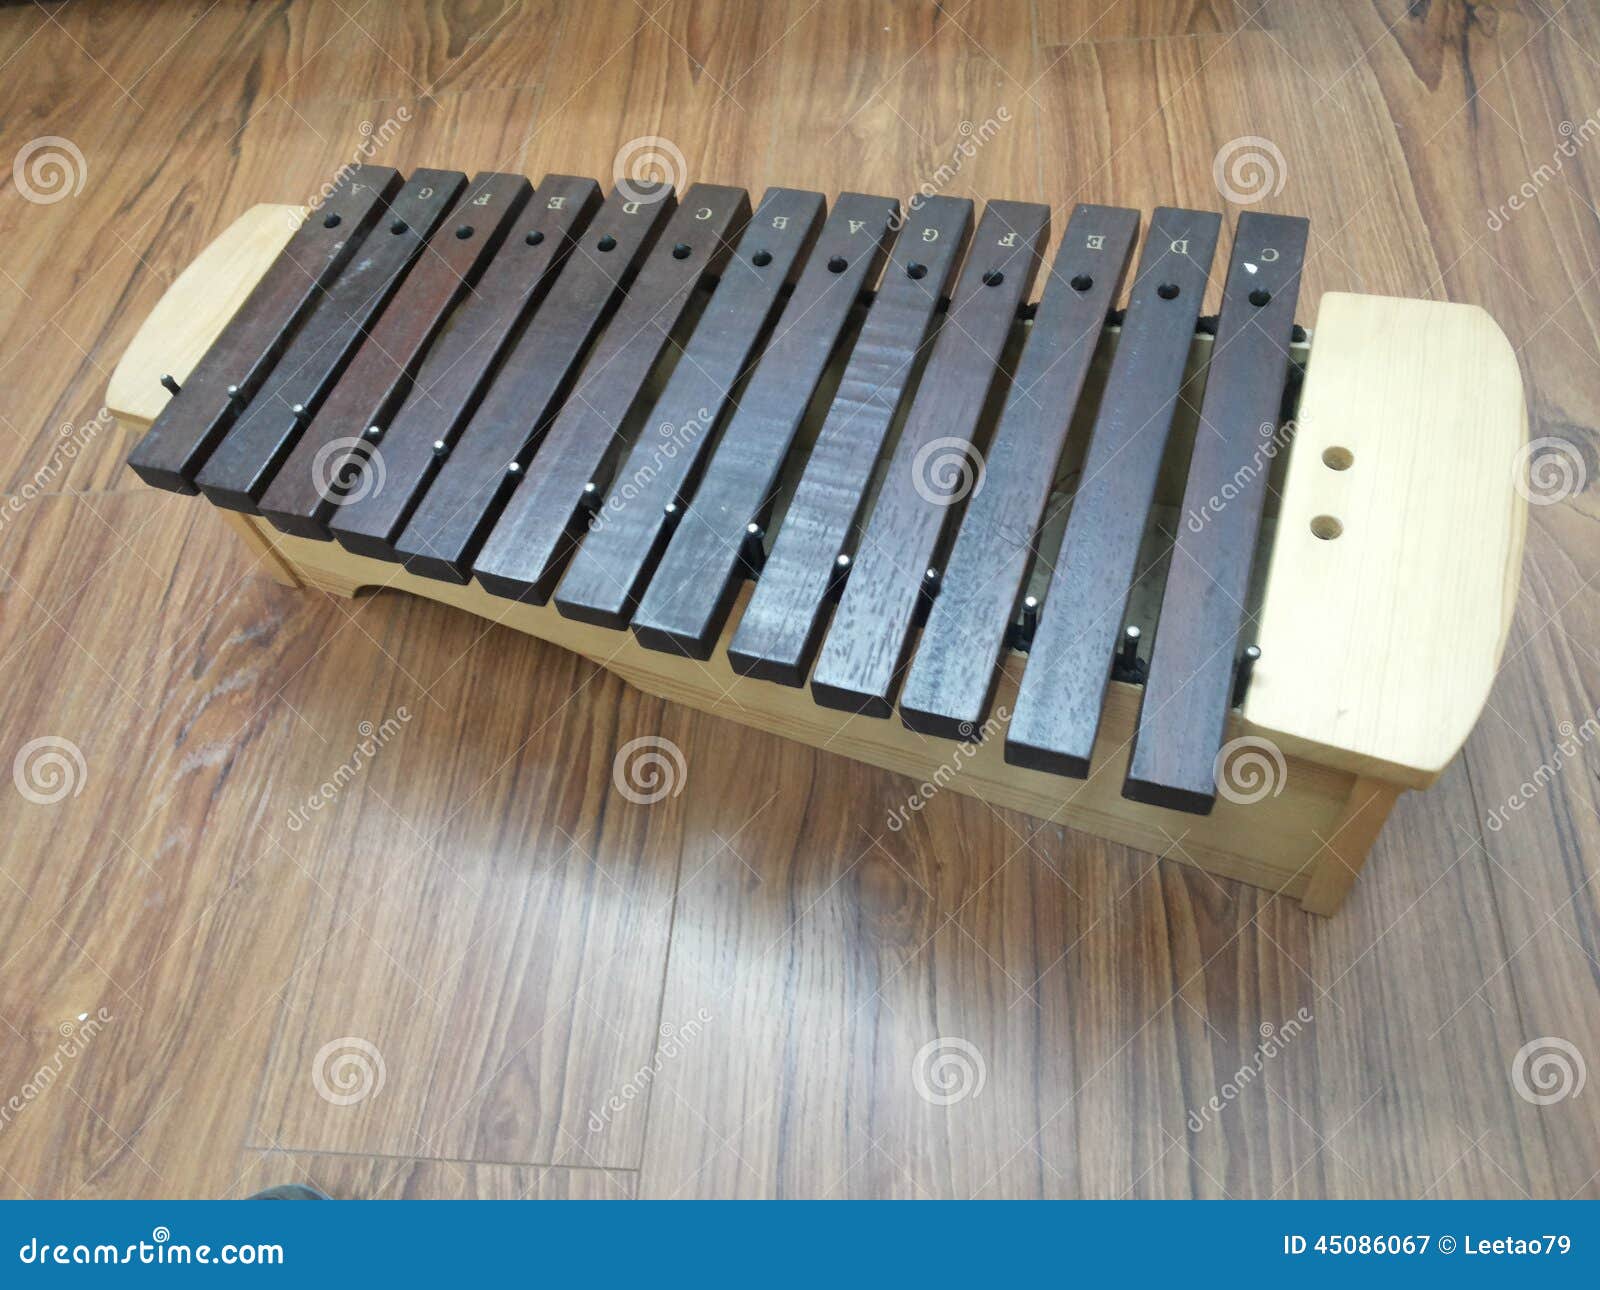 xylophone-composed-set-small-rectangular-pieces-wood-pieces-wood 